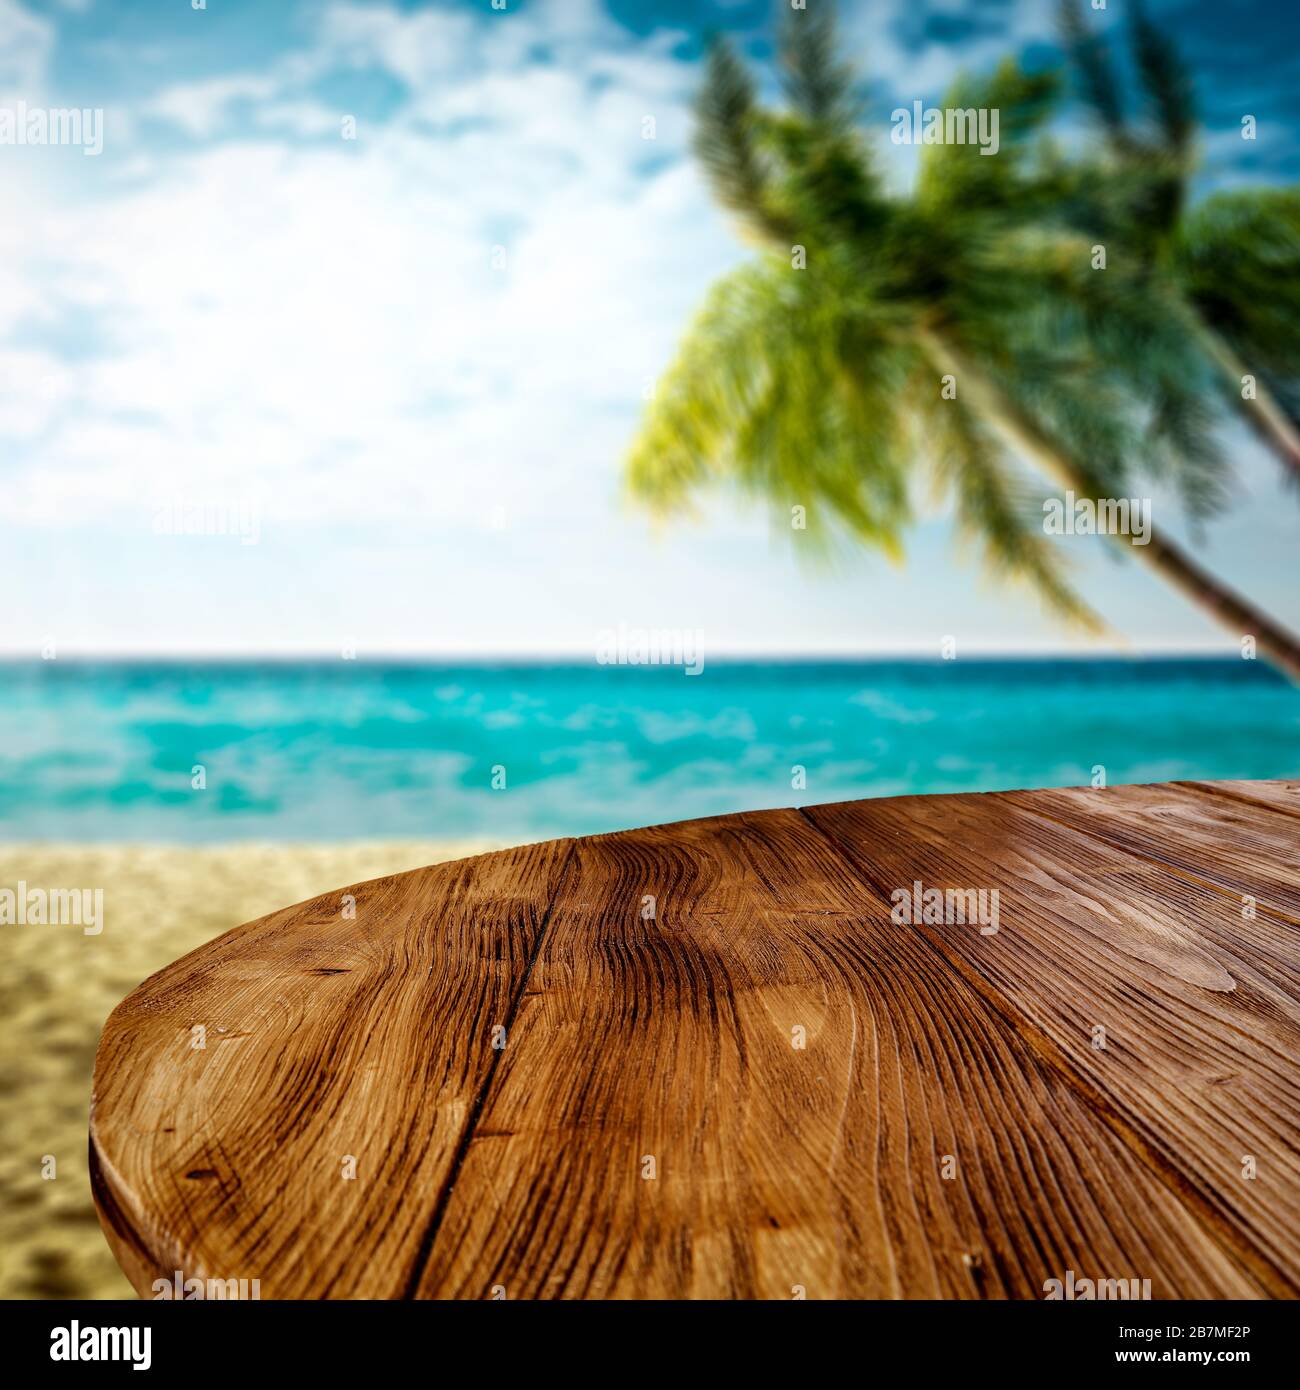 Table background with space for your decoration. Blurred background of beach with green coco palms. Sunny day with blue sky and sunlight. Summer time. Stock Photo